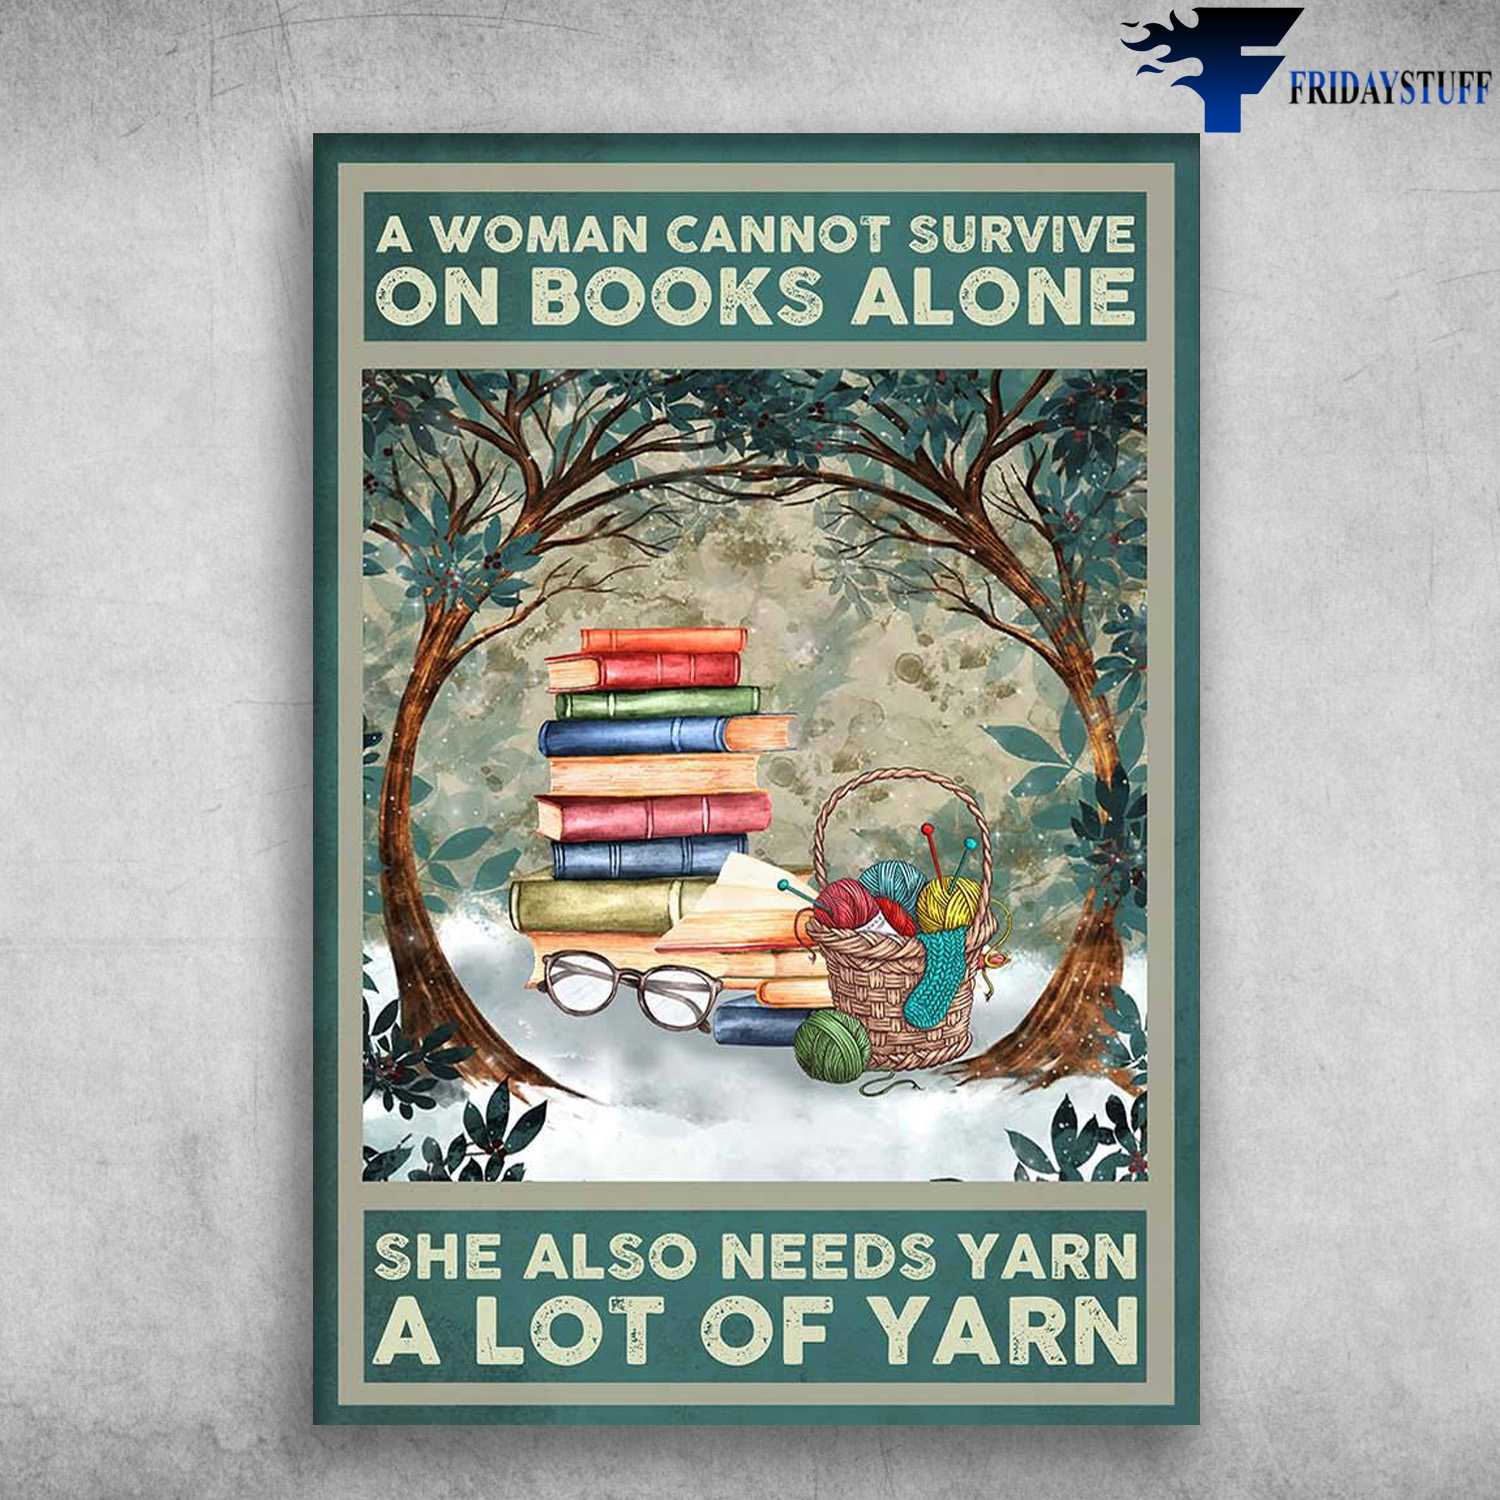 Books And Yarn - A Woman Cannot Survive On Books Alone, She Also Needs Yarn, A Lot Of Yarn